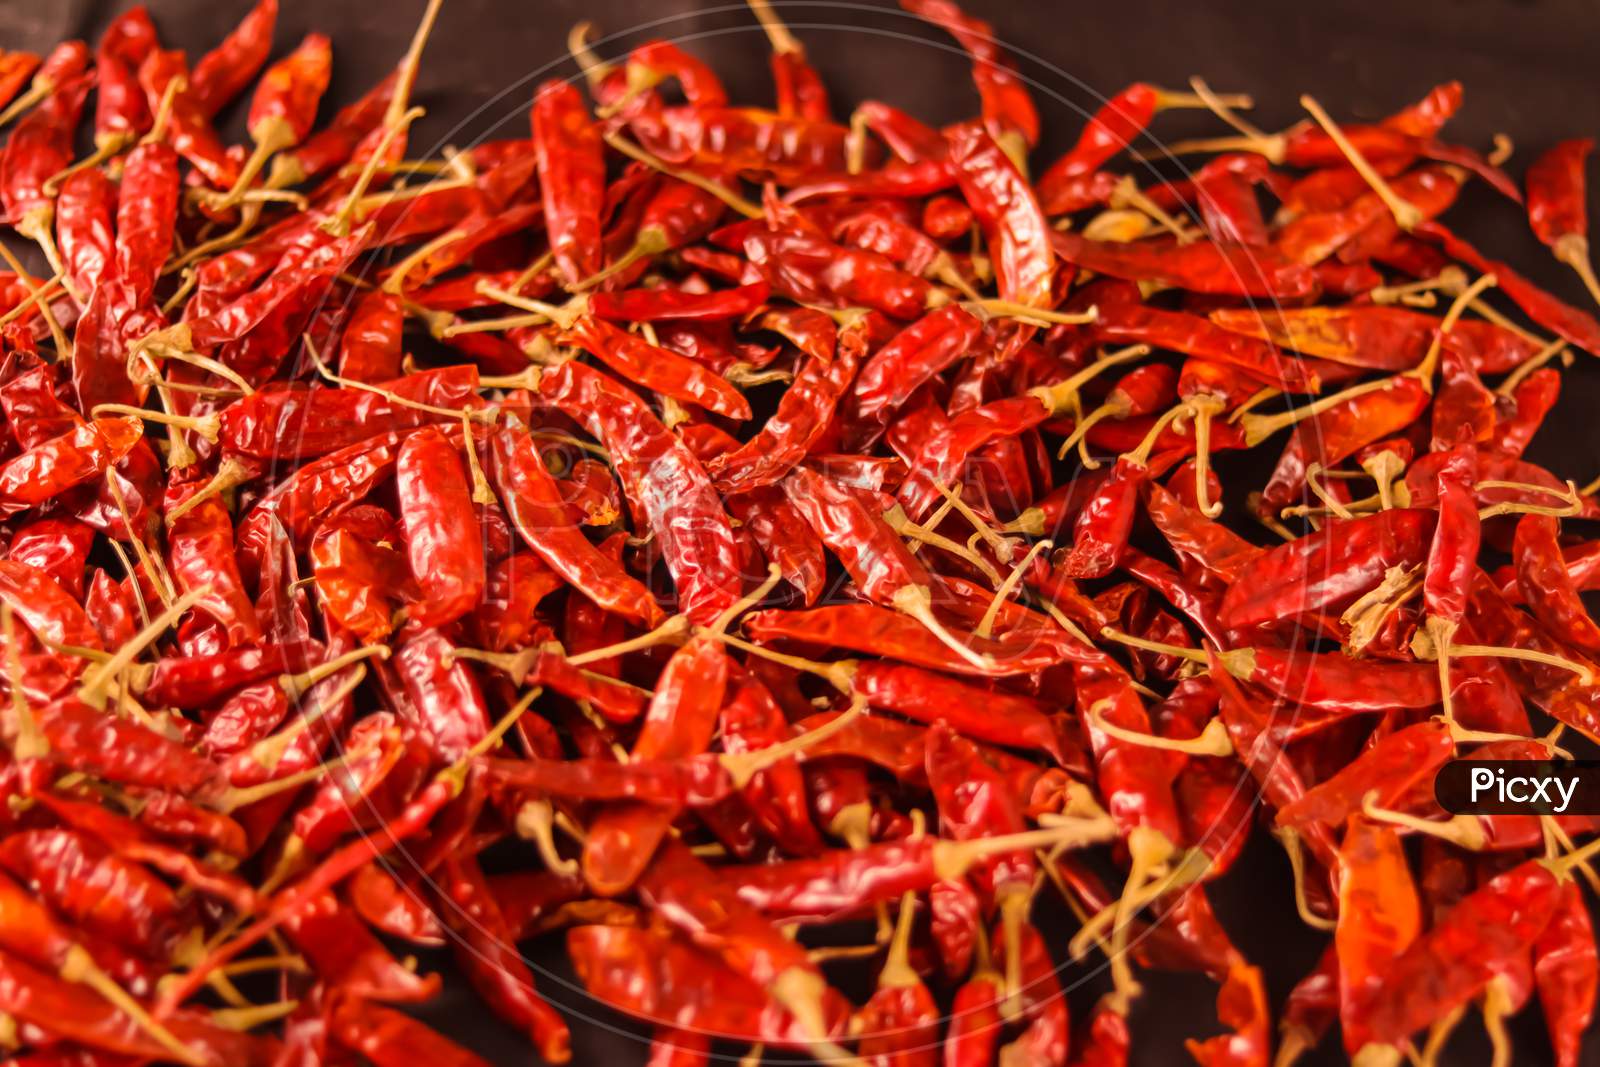 Dry Chilli Peppers,Spicy Seasoning,Lot Of Dried Chili As A Food Background,Dried Red Peppers On A Wooden Table,Red Dry Chili Pepper Background,Dry Paprika Hd Footage